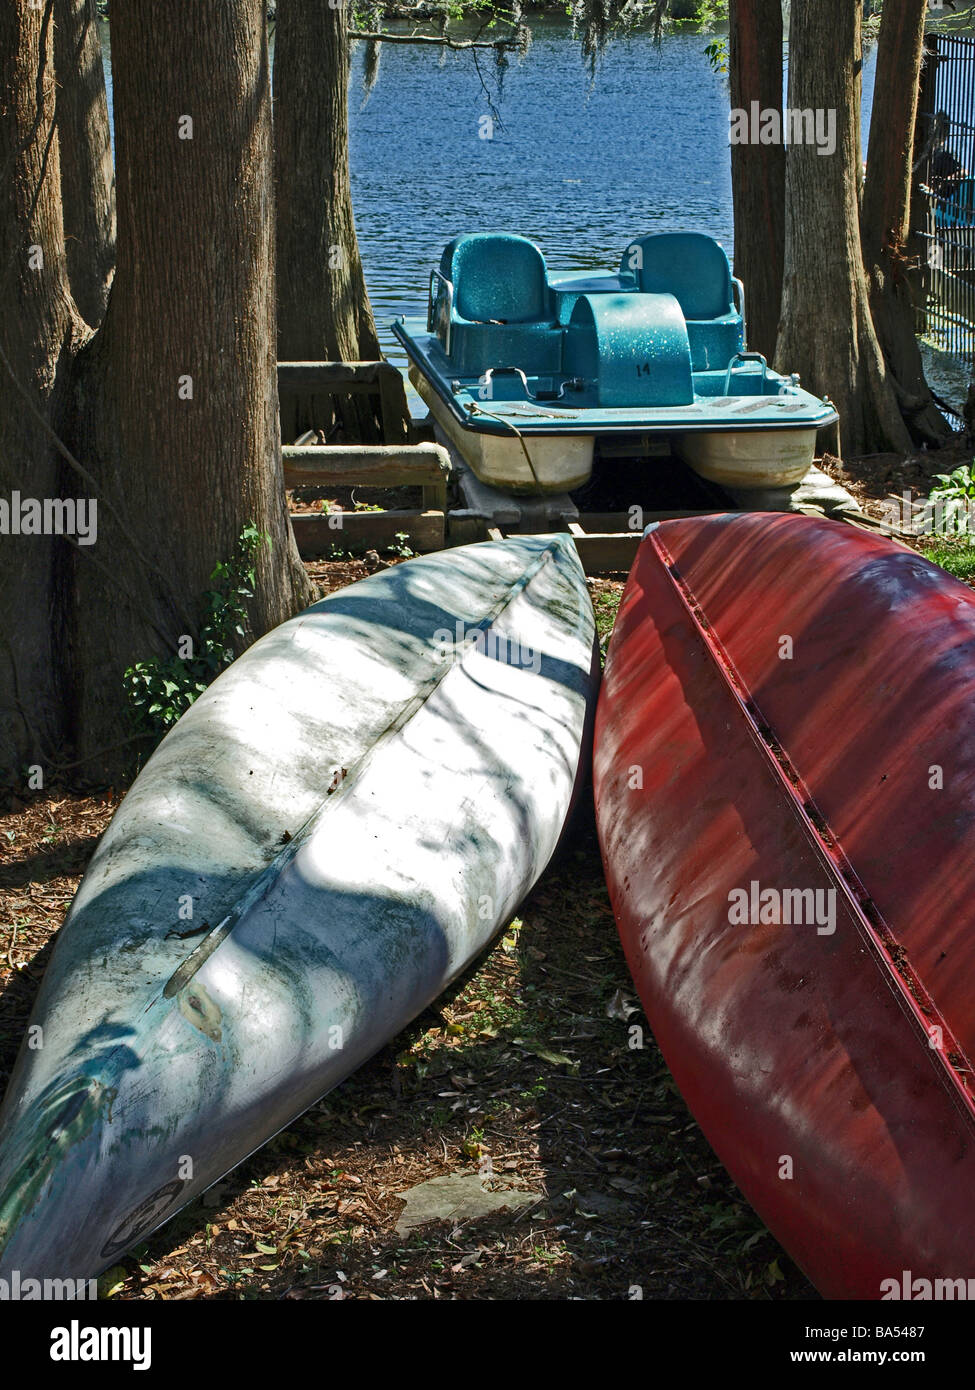 two canoes on shore upside down with the lake in the background and also a peddle wheel boat surrounded by trees Stock Photo